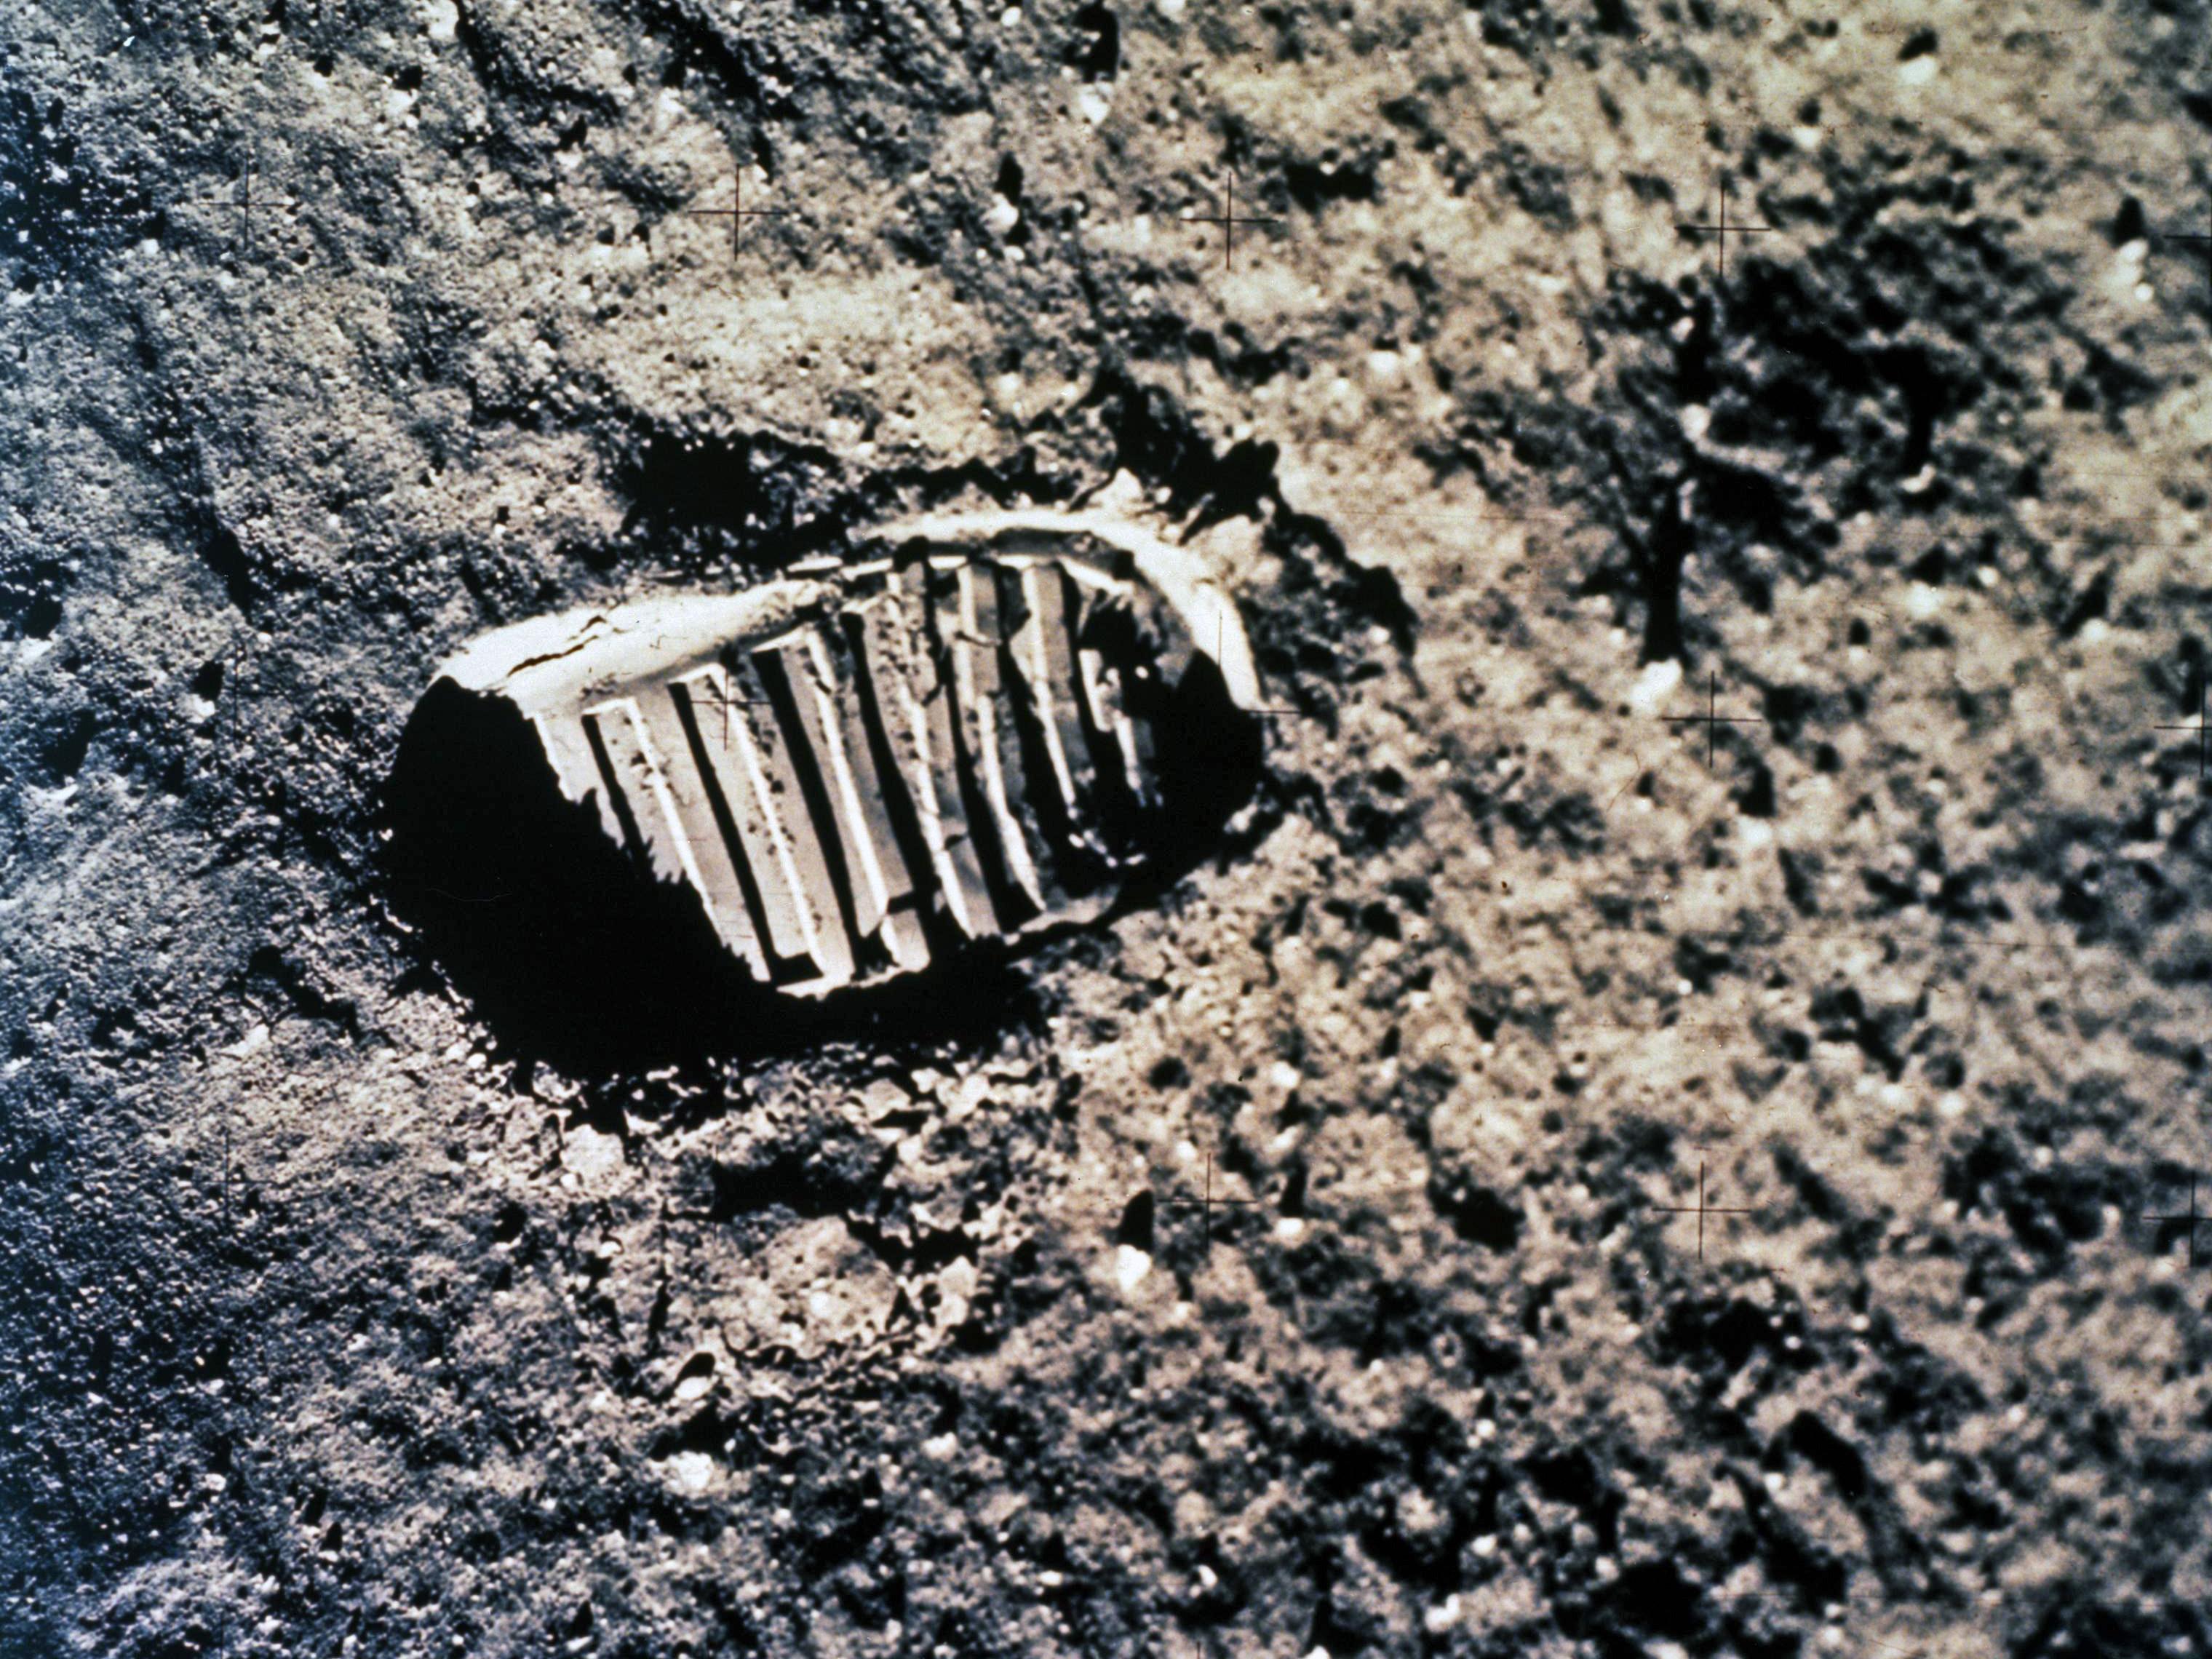 The Road to Apollo on the Moon